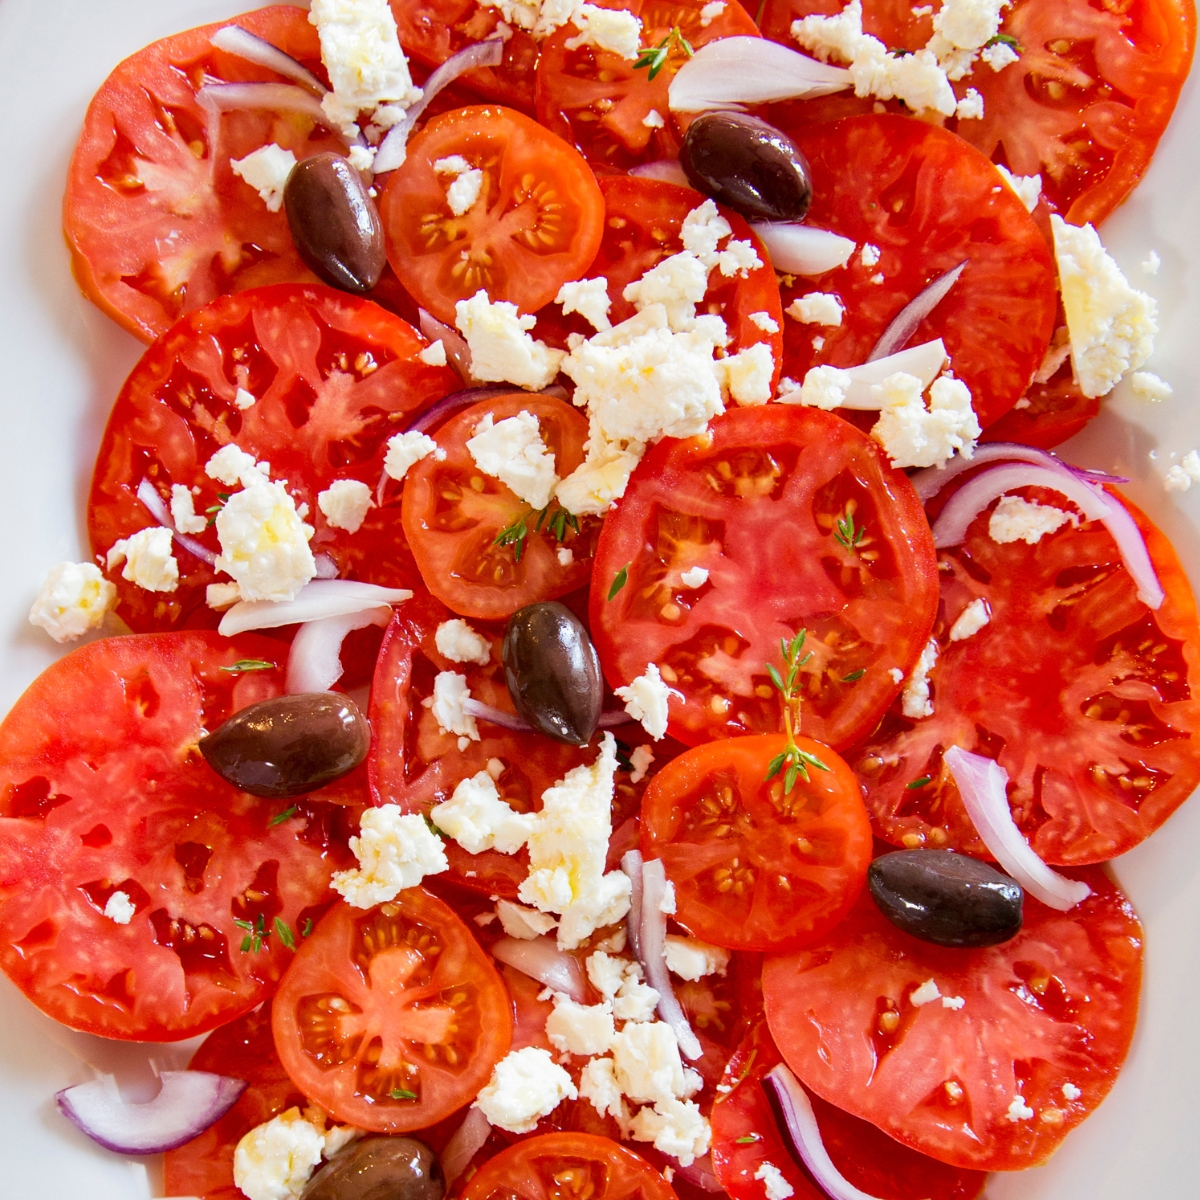 ripe tomato salad with feta cheese, olives and red onions